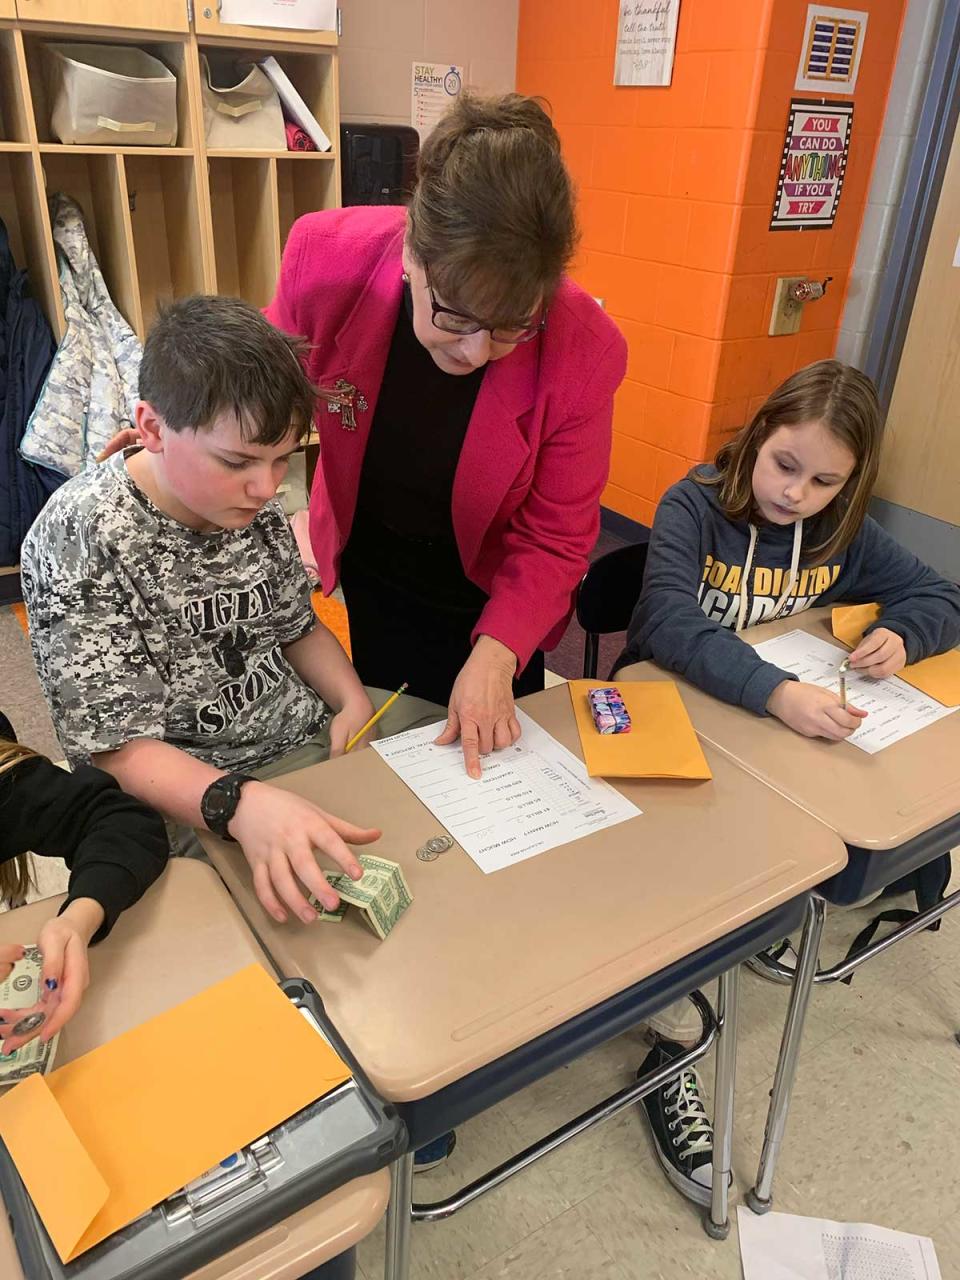 Galion City Schools Treasurer Charlene Parkinson, center, works with Wesley Williams, left, and Shanessa Bryant to count recently collected donations during the Galion Intermediate School's fundraiser benefiting the Galion Golden Age Center.